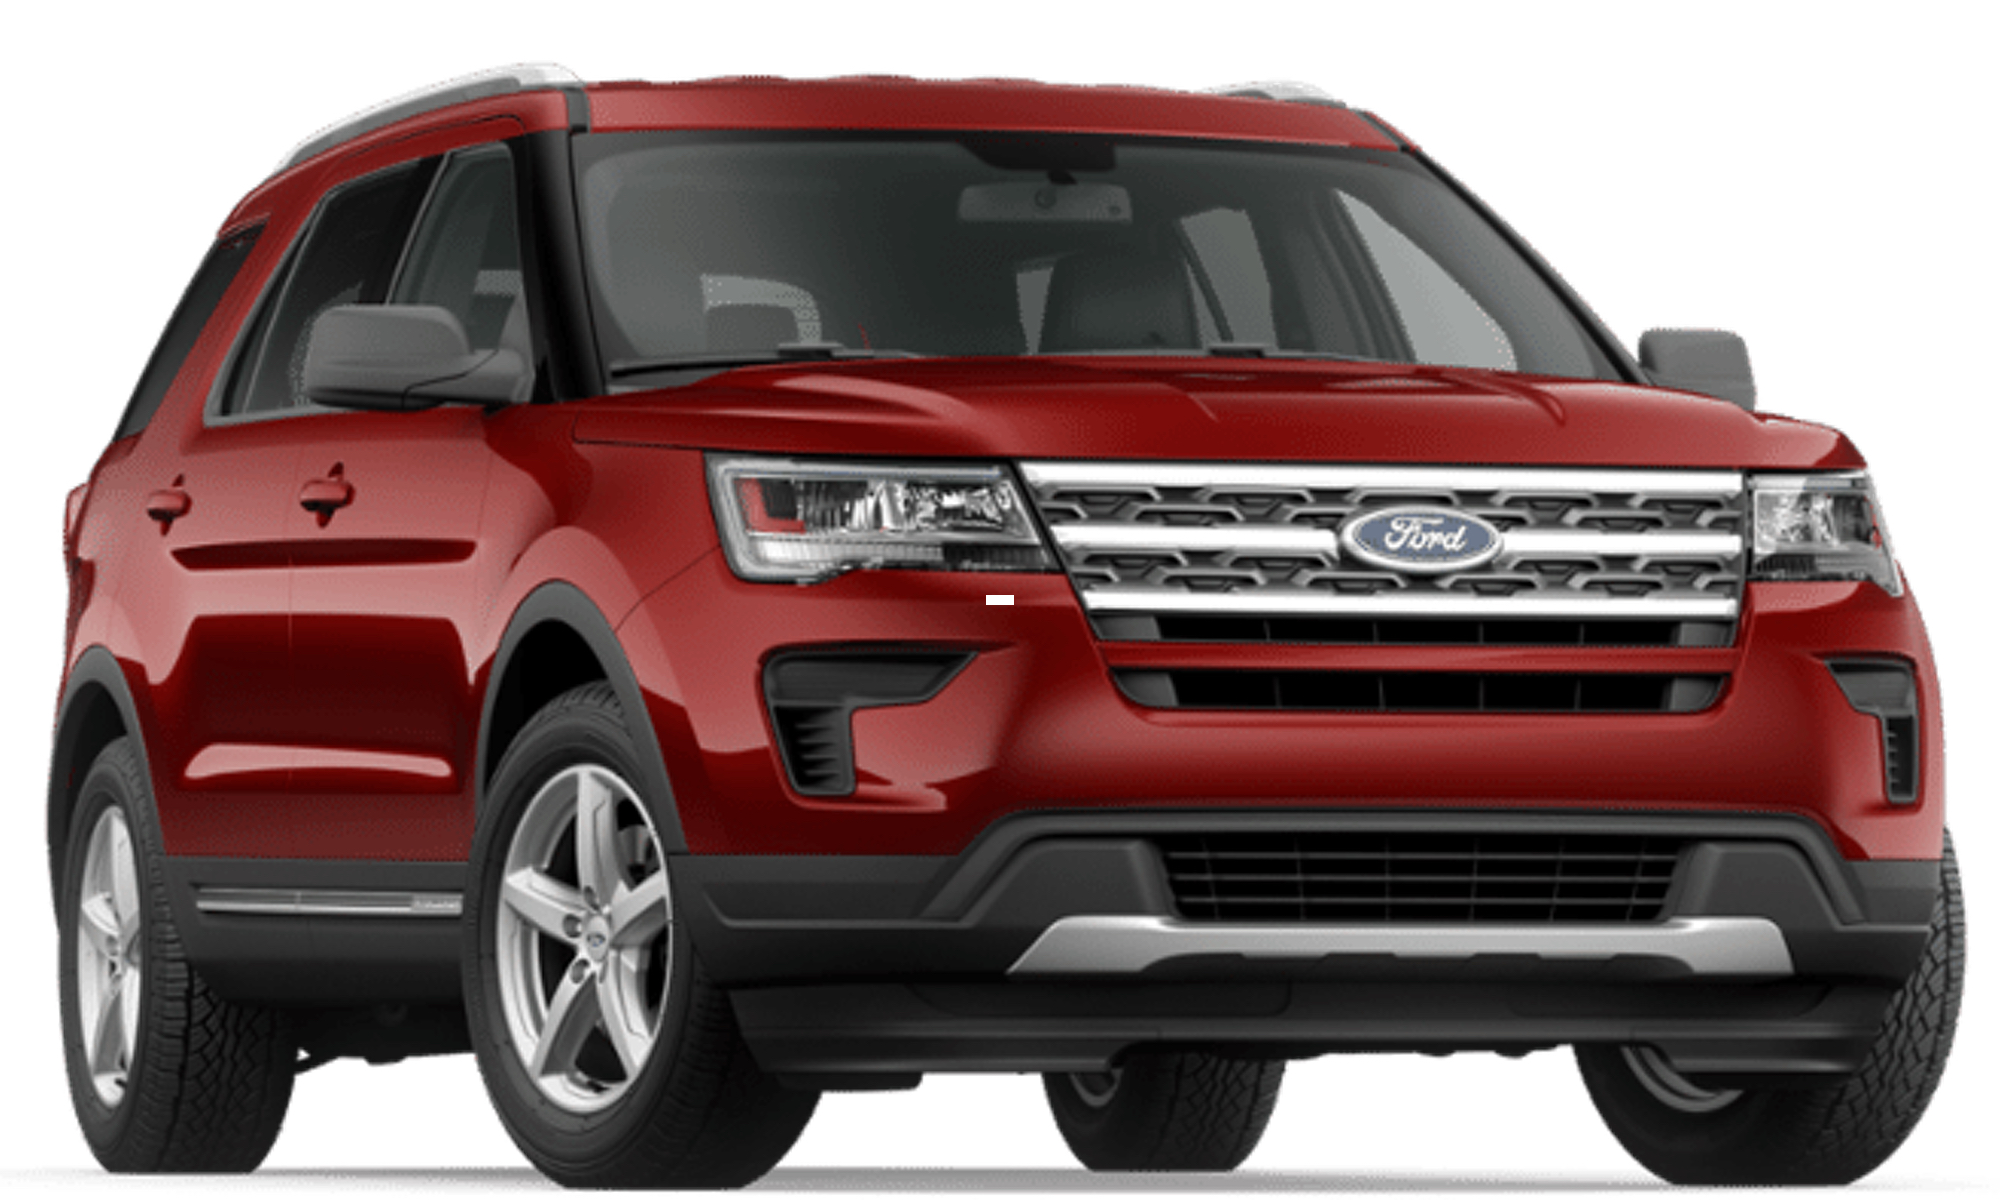 40 Awesome Ford explorer exterior colors Info